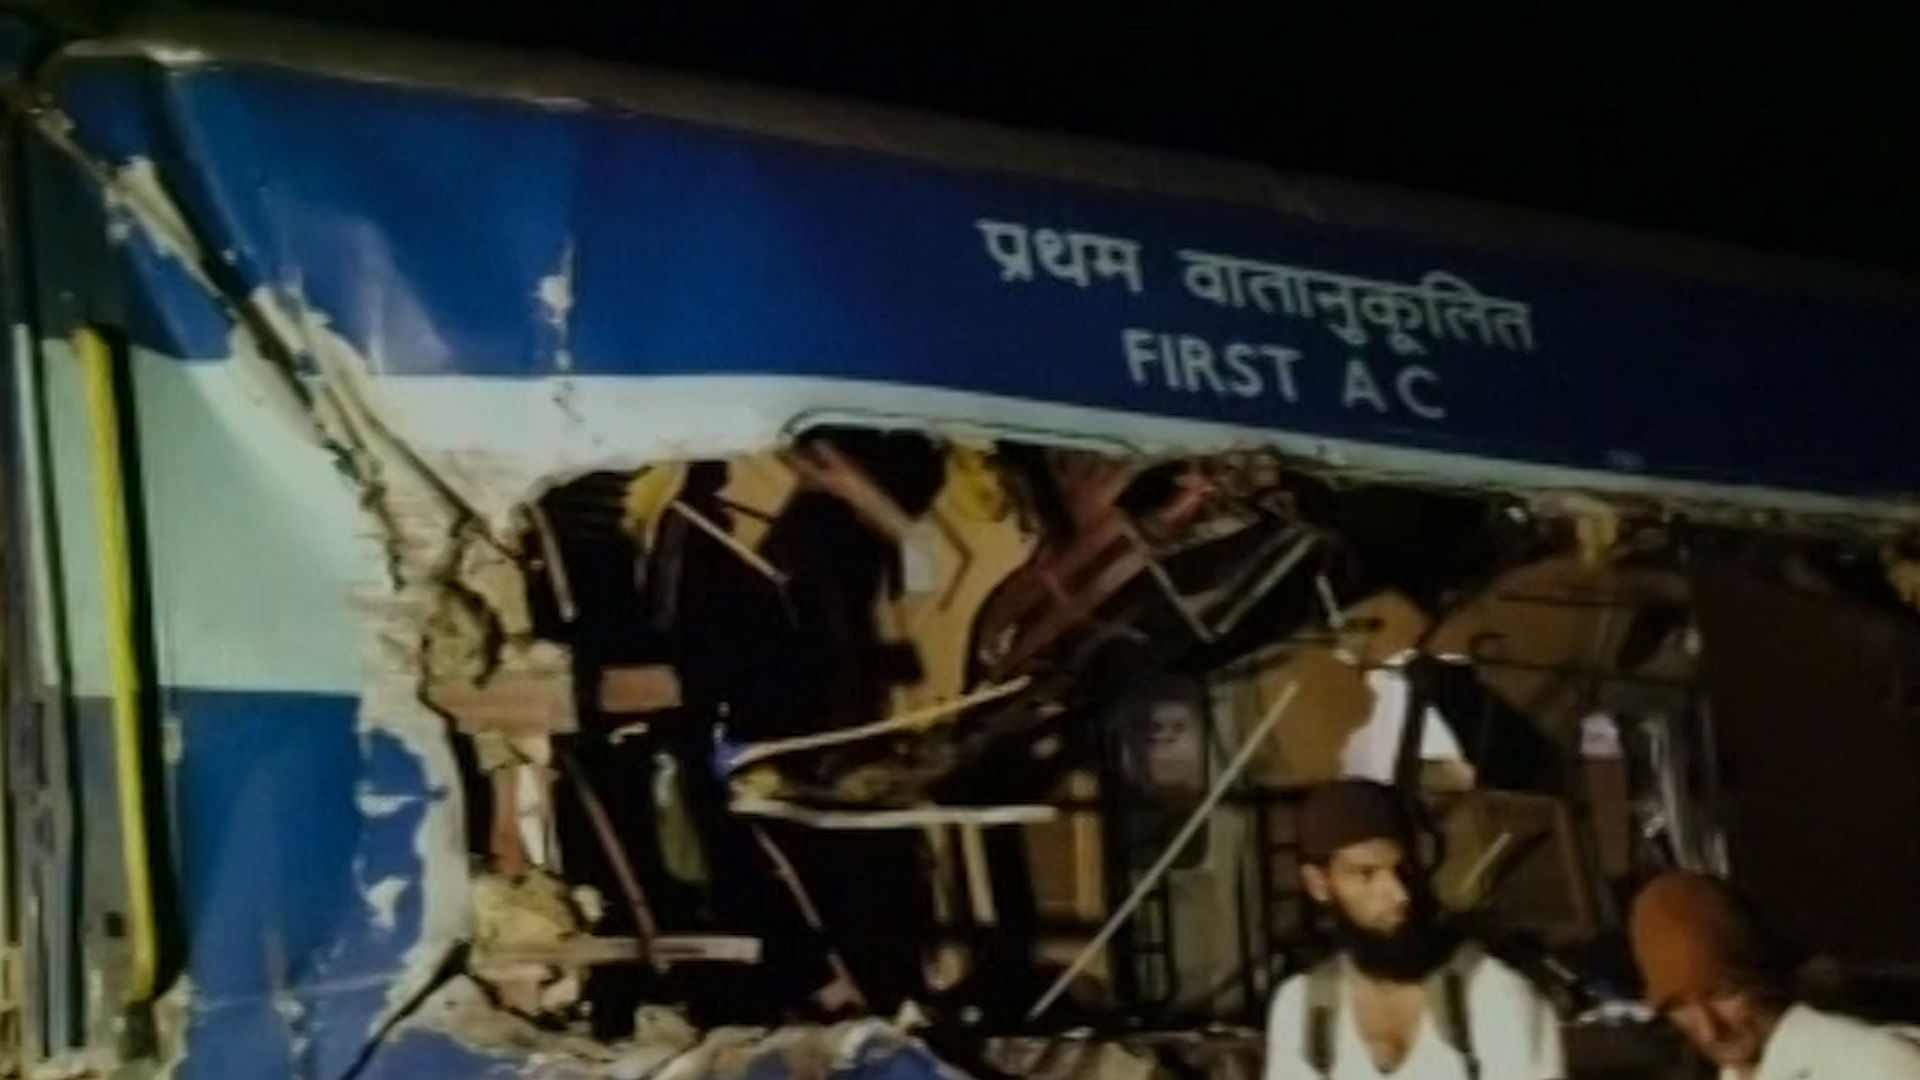 Bangalore-Nanded Express collided with a lorry on Monday morning, killing at least 6 people. (Photo: ANI screengrab)